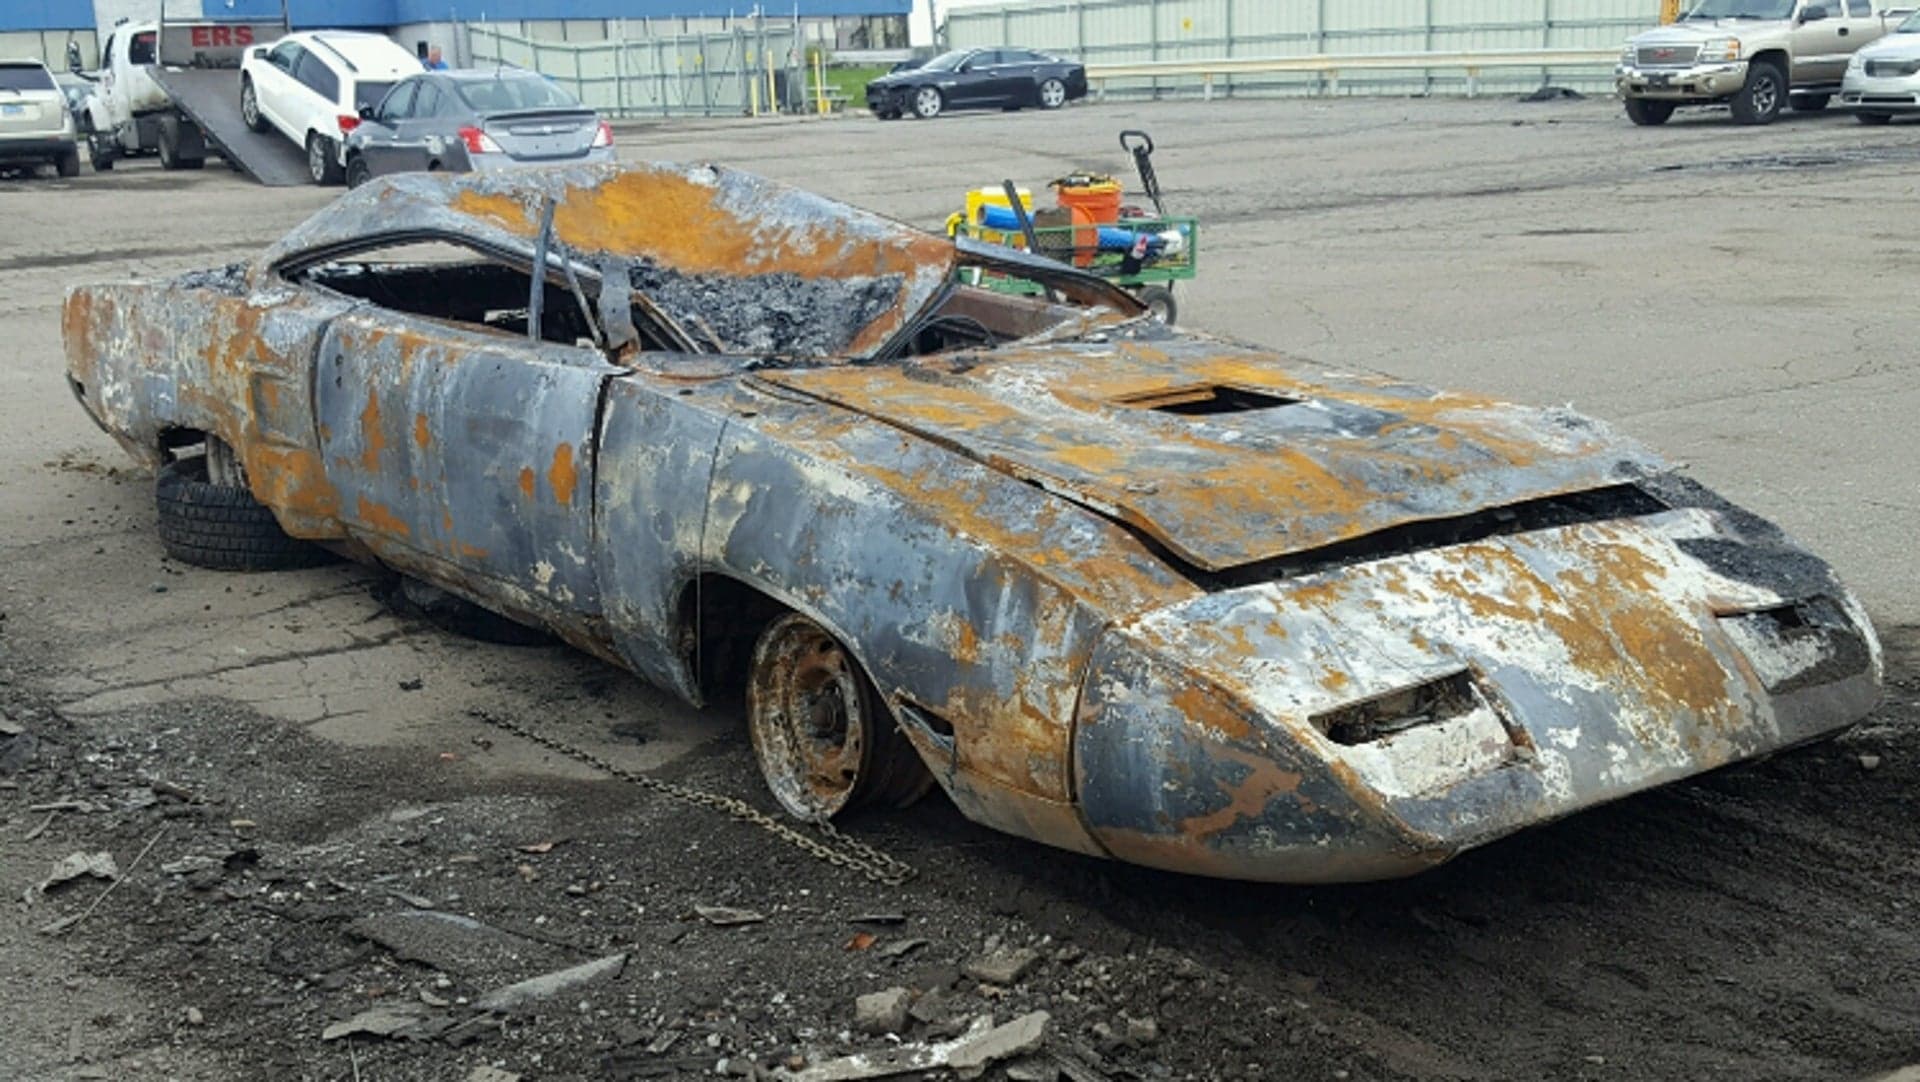 Buy This Junkyard-Quality 1970 Plymouth Road Runner Superbird if You’ve Got the Guts